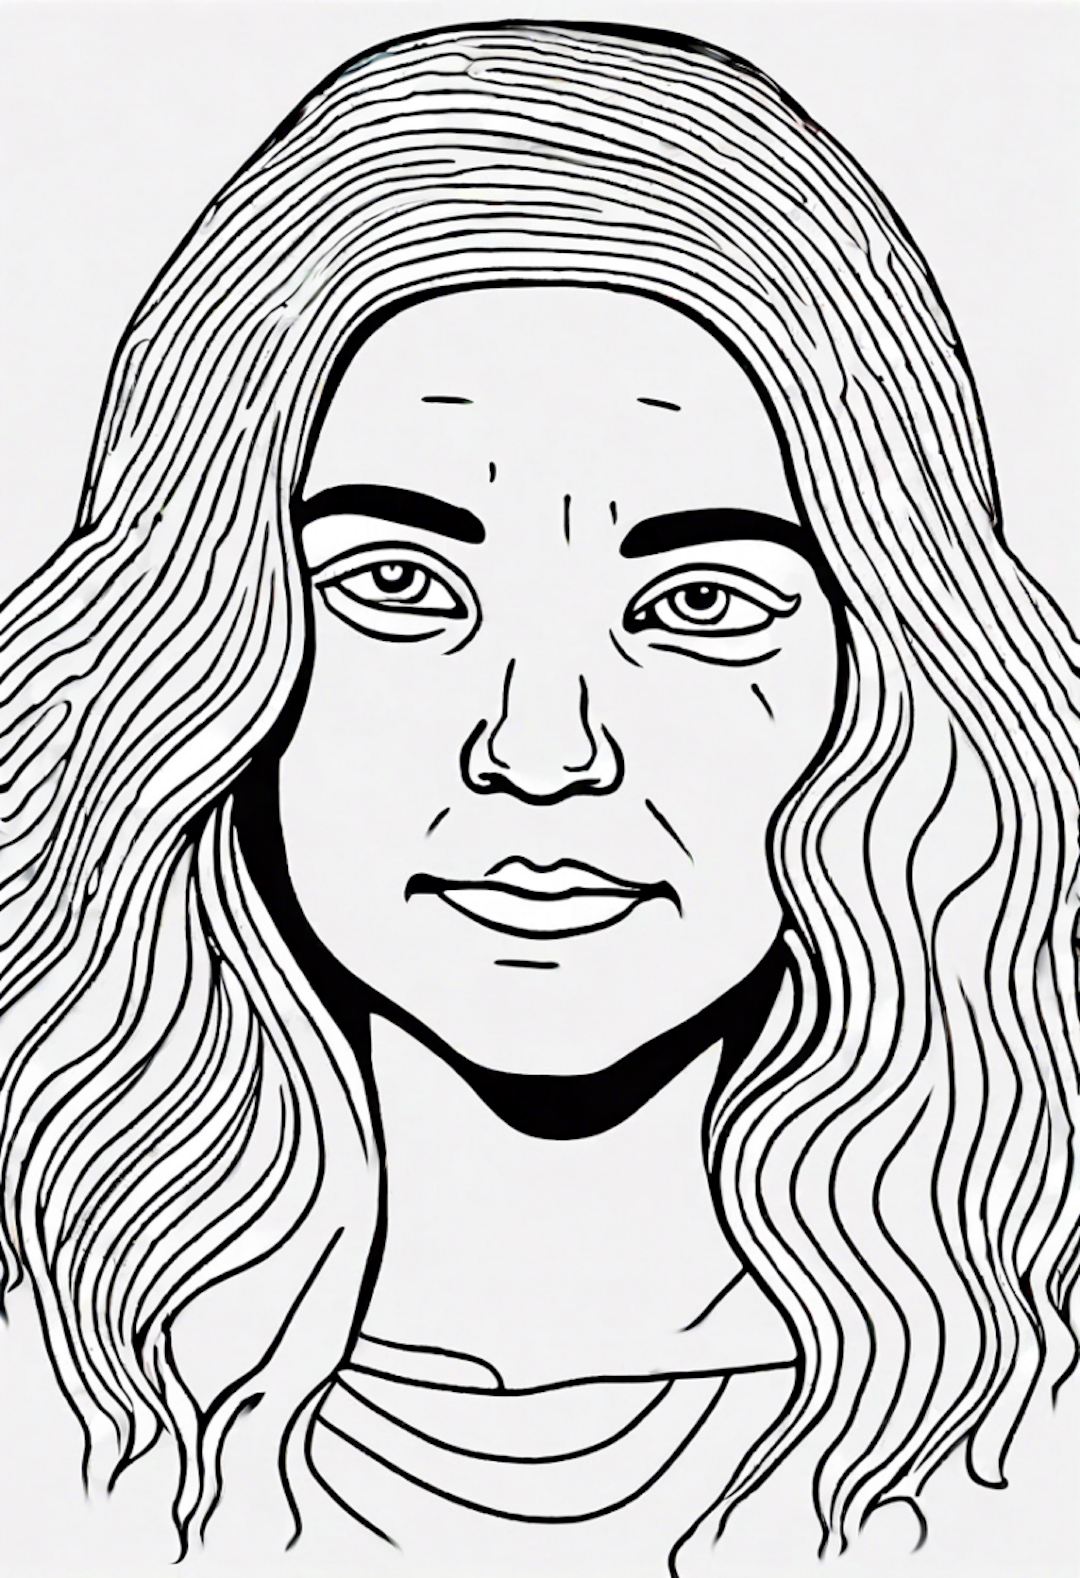 Serene Smiling Girl Coloring Page coloring pages